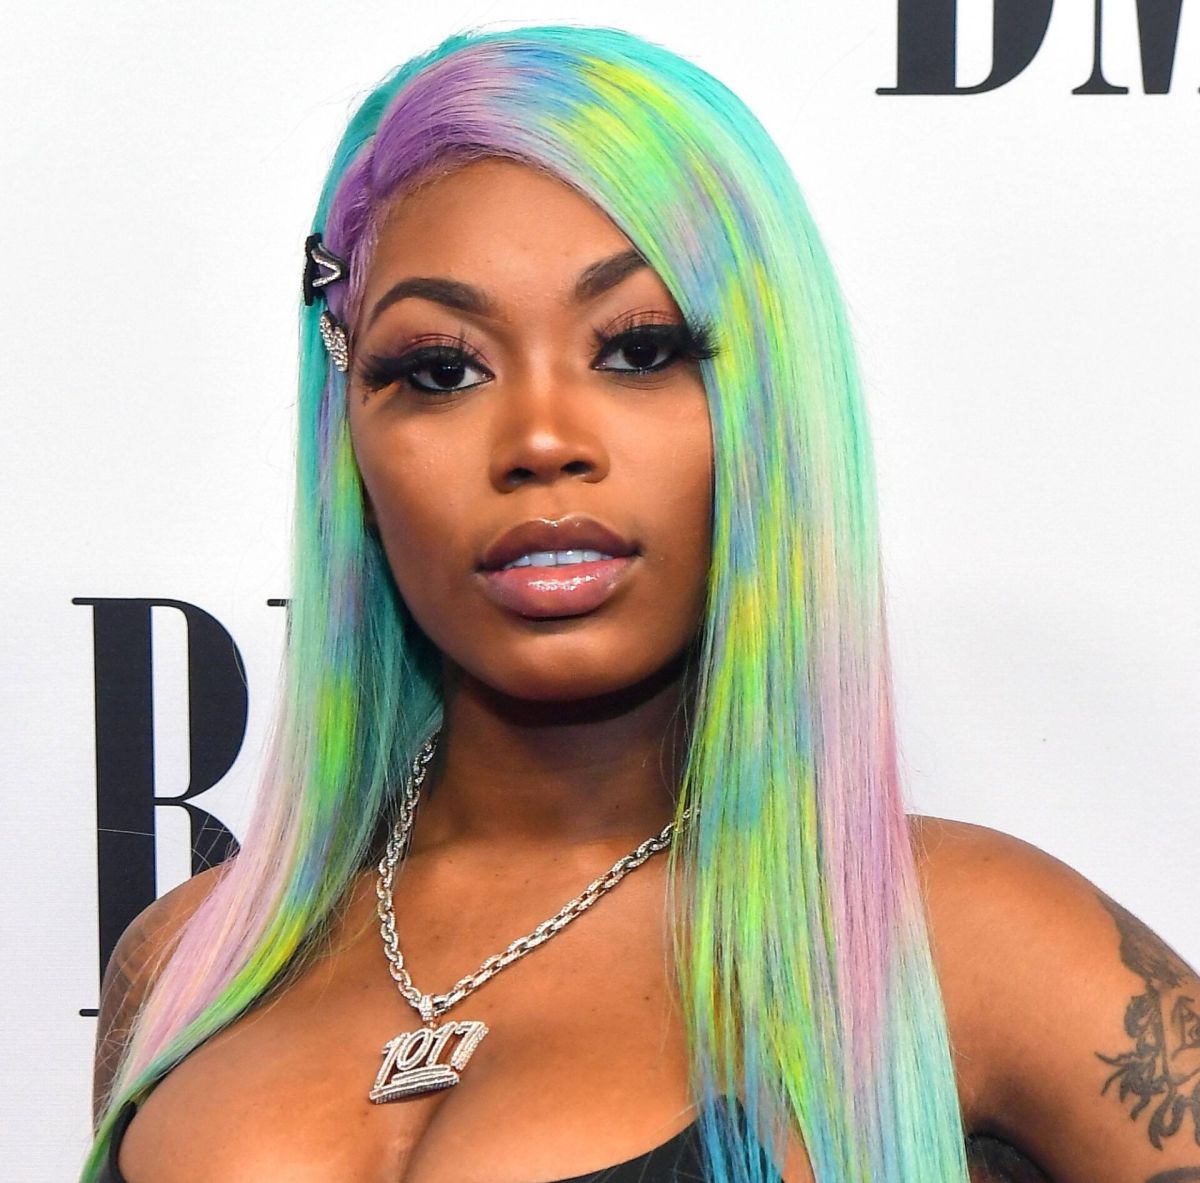 Asian Doll Lashes Out At Vladtv Over Reported King Von Criticism, Walks Out Of Interview 1